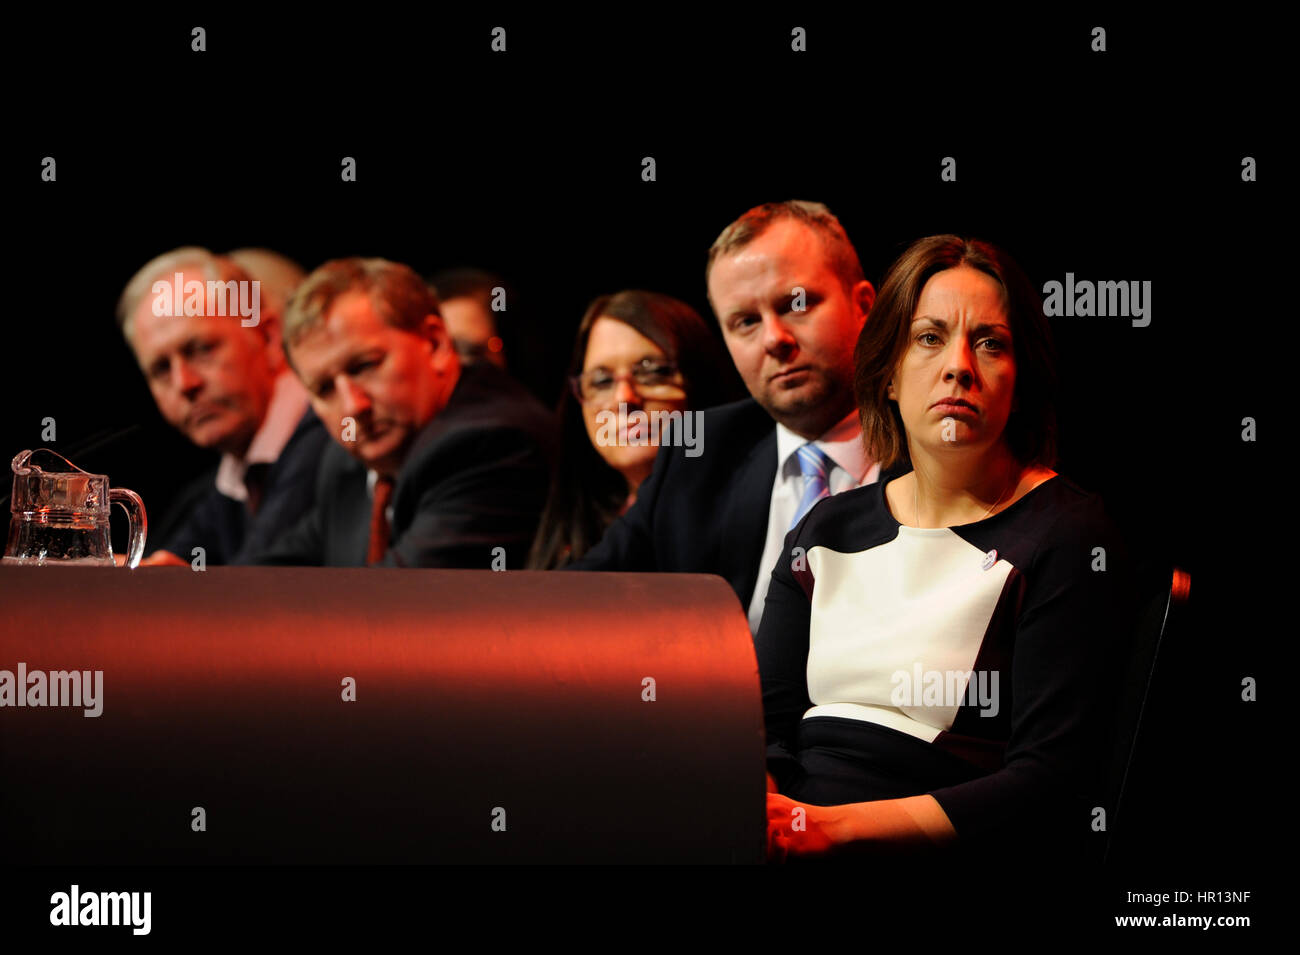 Perth, Scotland, UK. 26th February 2017. Scottish Labour leader Kezia Dugdale (R)listens to Jeremy Corbyn's speech to the Scottish Labour Party conference in Perth, Credit: Ken Jack/Alamy Live News Stock Photo